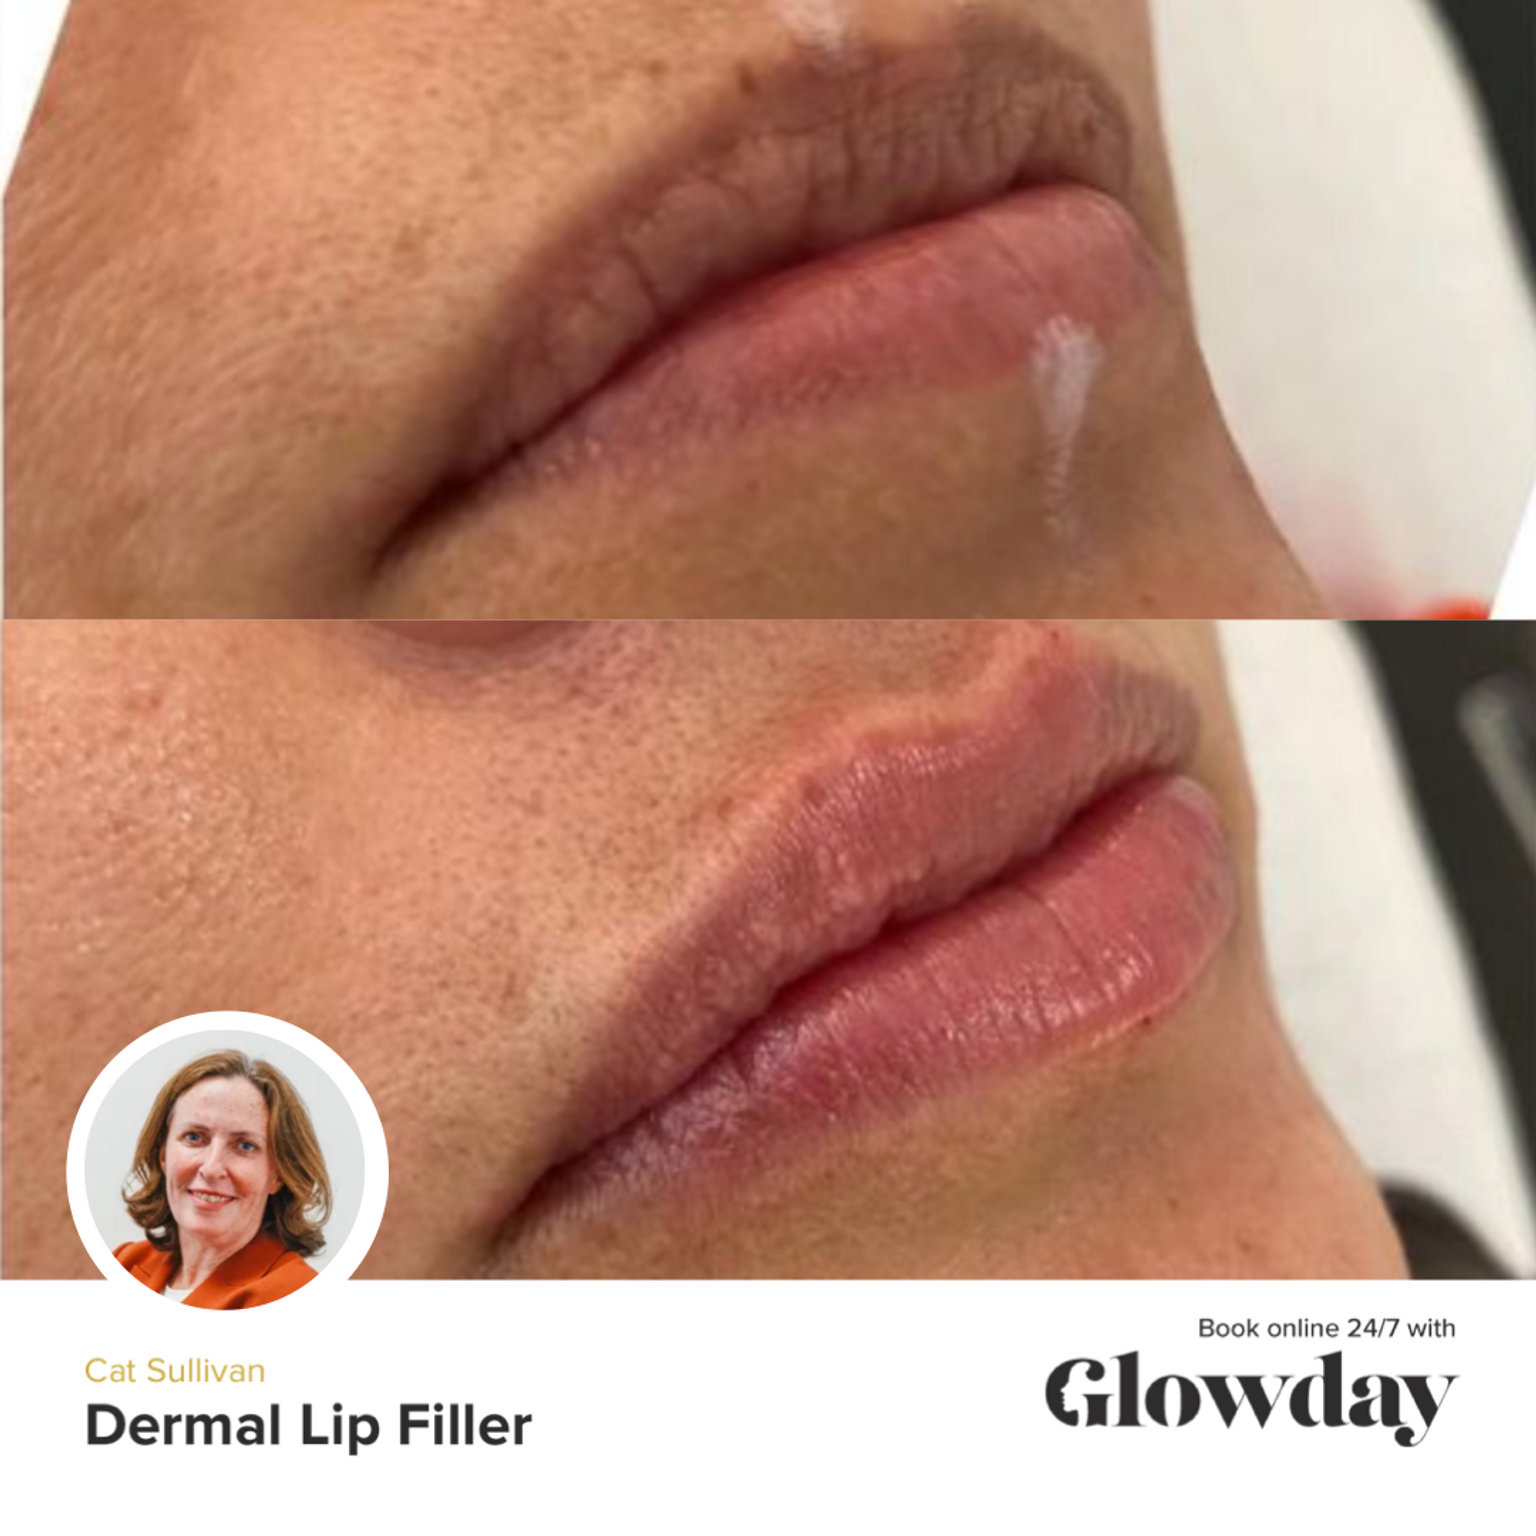 Lip Fillers Before And After - Cat Sullivan - Glowday